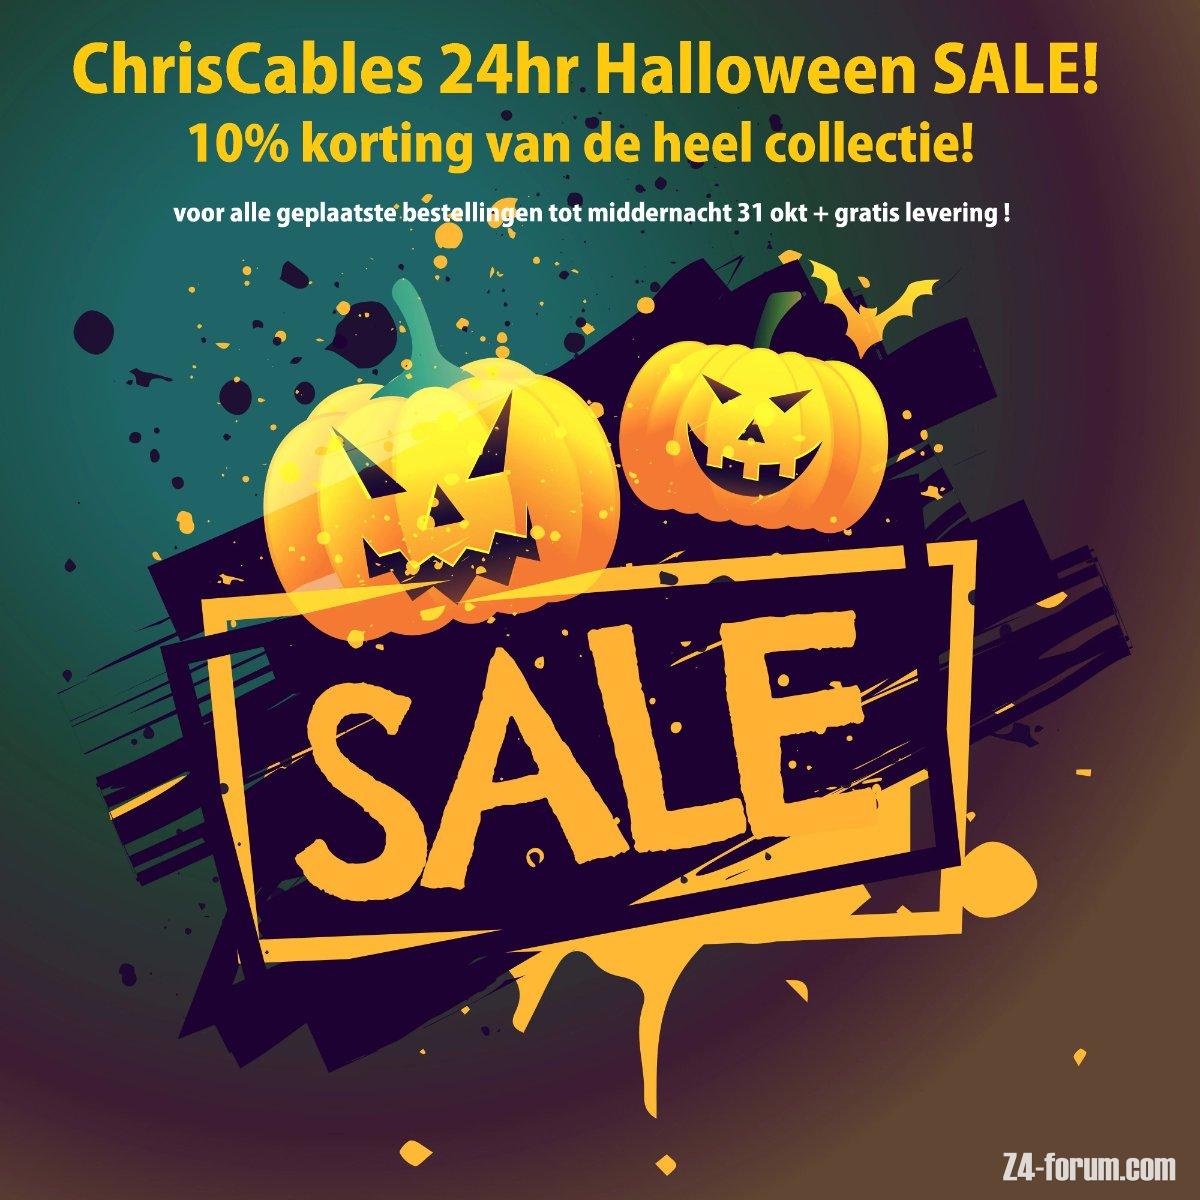 ChrisCables Halloween sale 2021.jpg